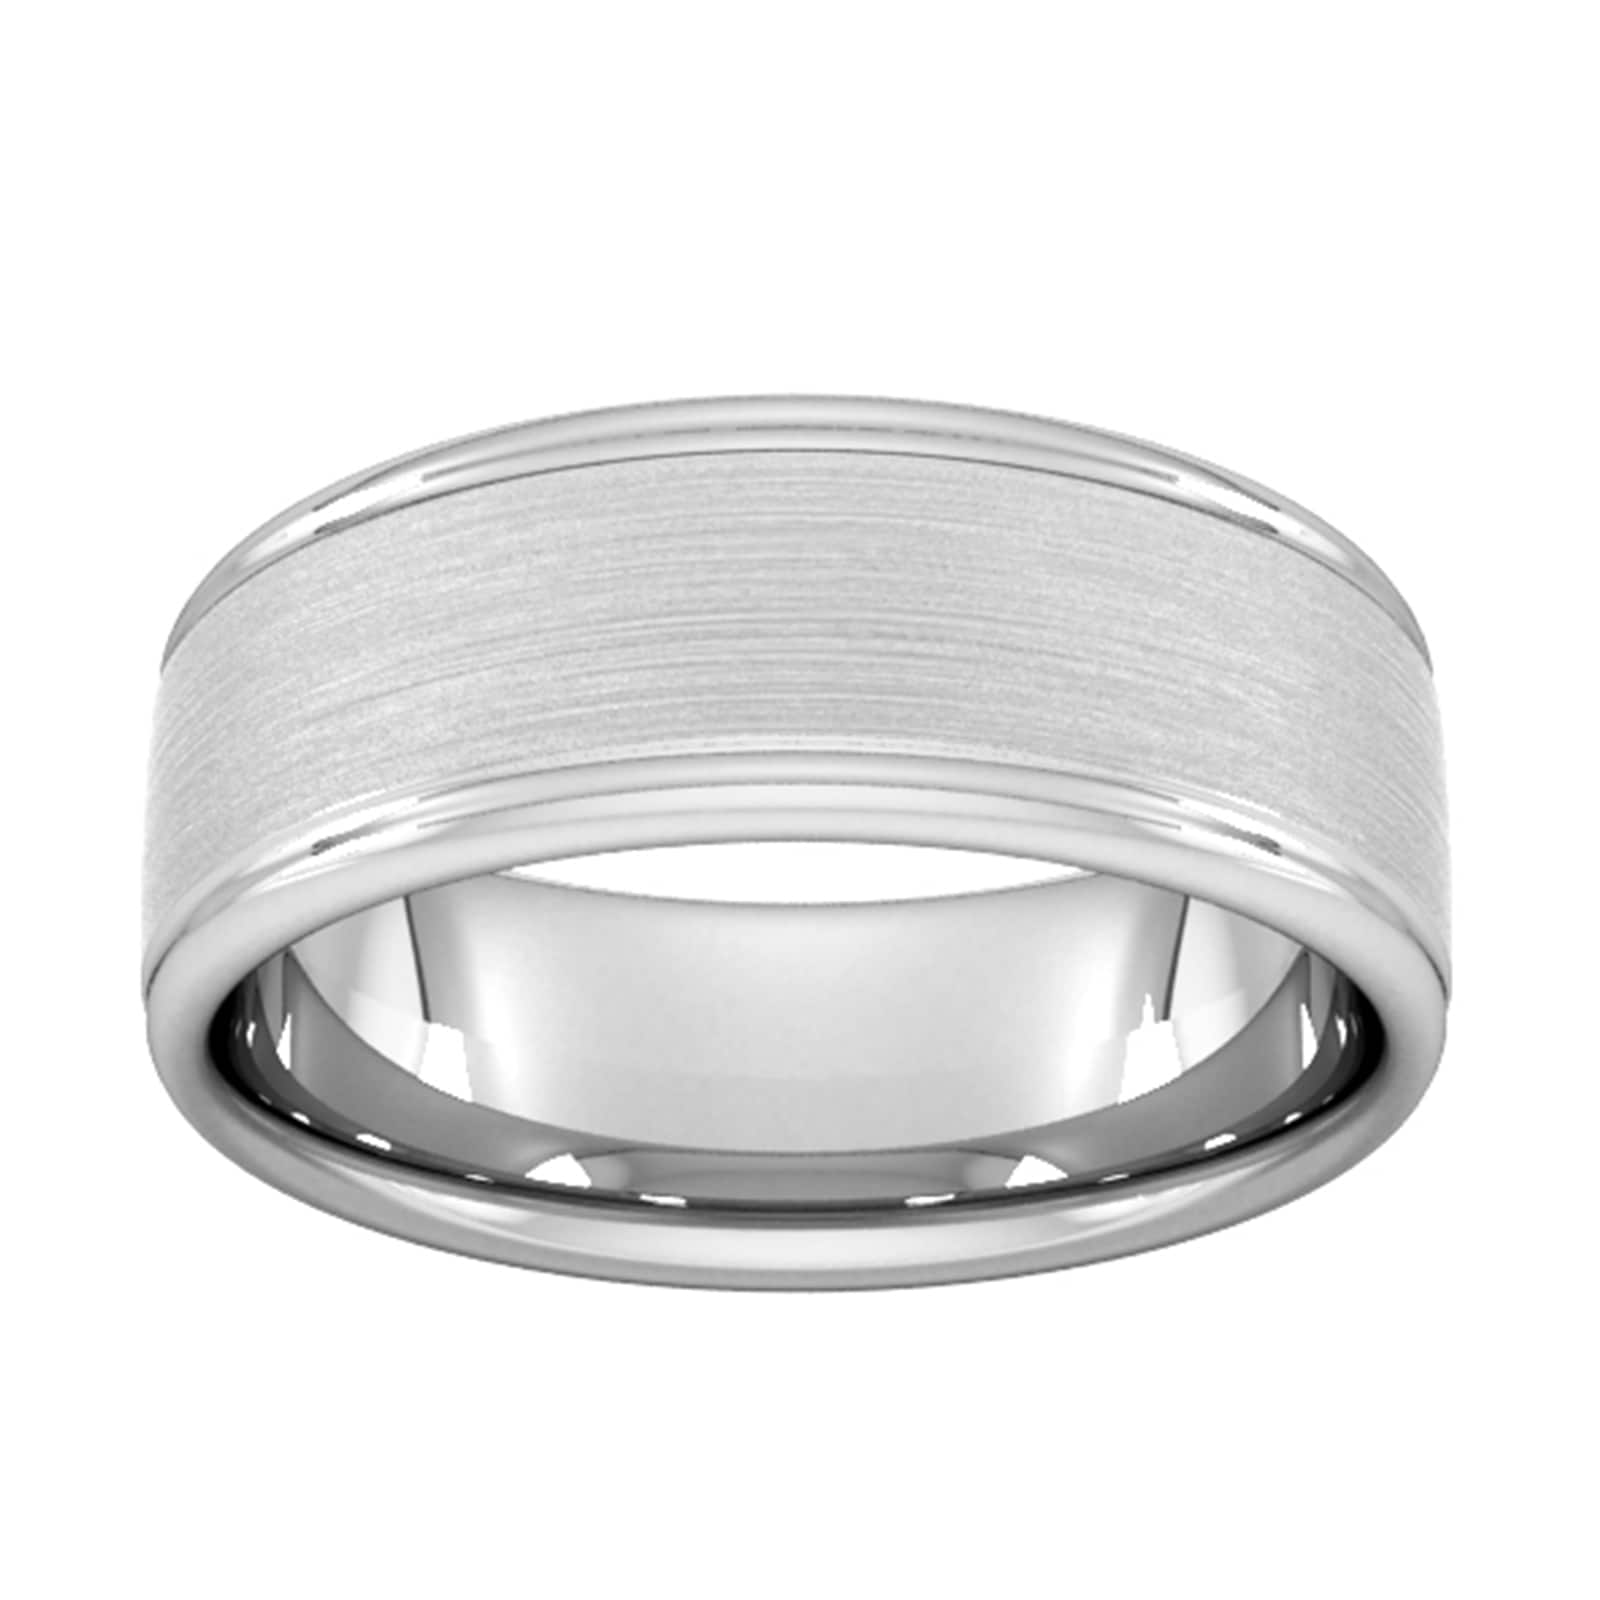 8mm Traditional Court Standard Matt Centre With Grooves Wedding Ring In 950 Palladium - Ring Size Q